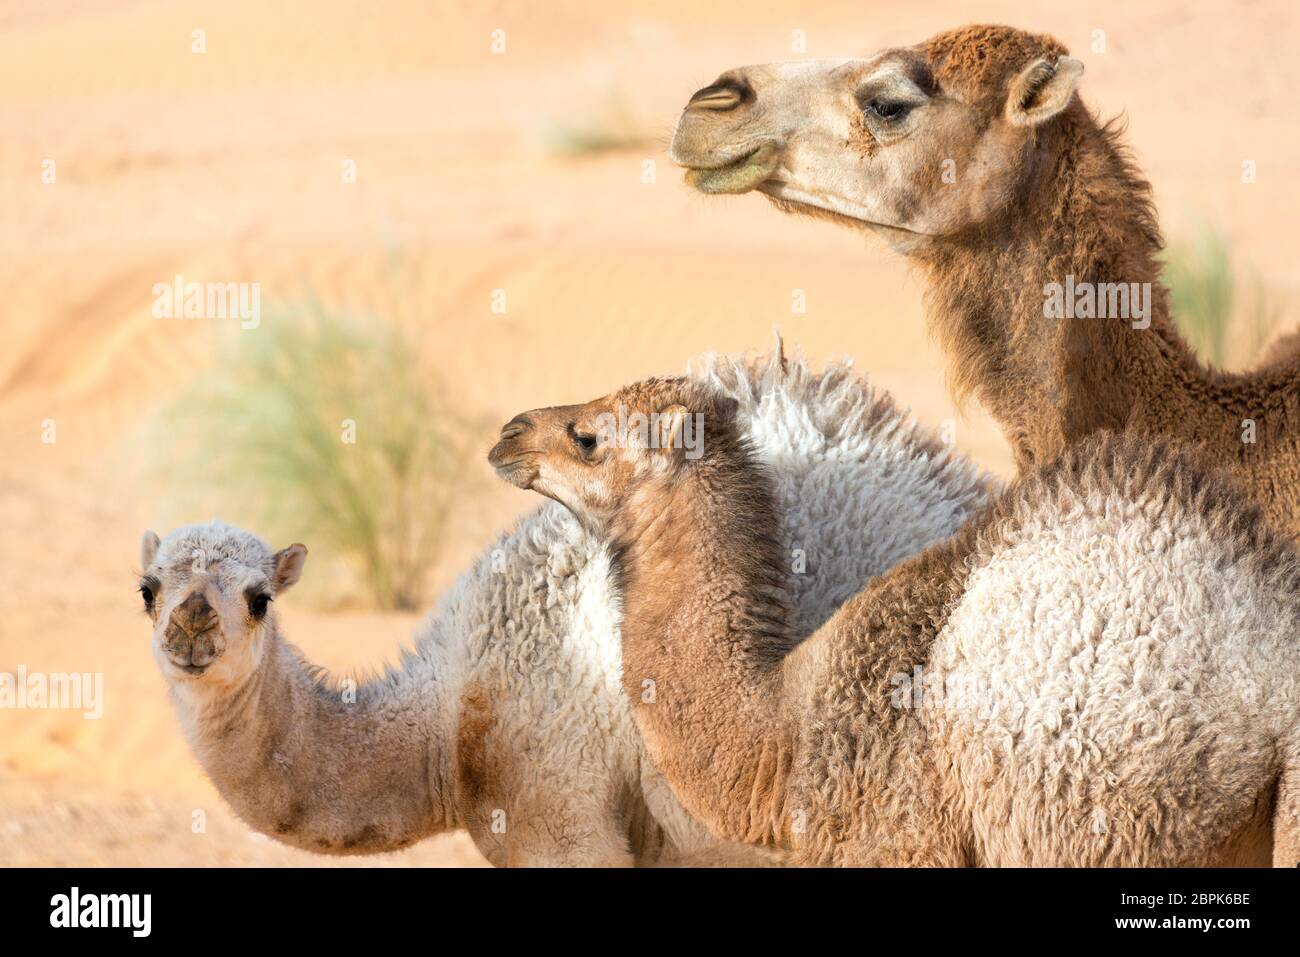 Family of three camels standing together in the Sahara Desert near Douz, Tunisia Stock Photo